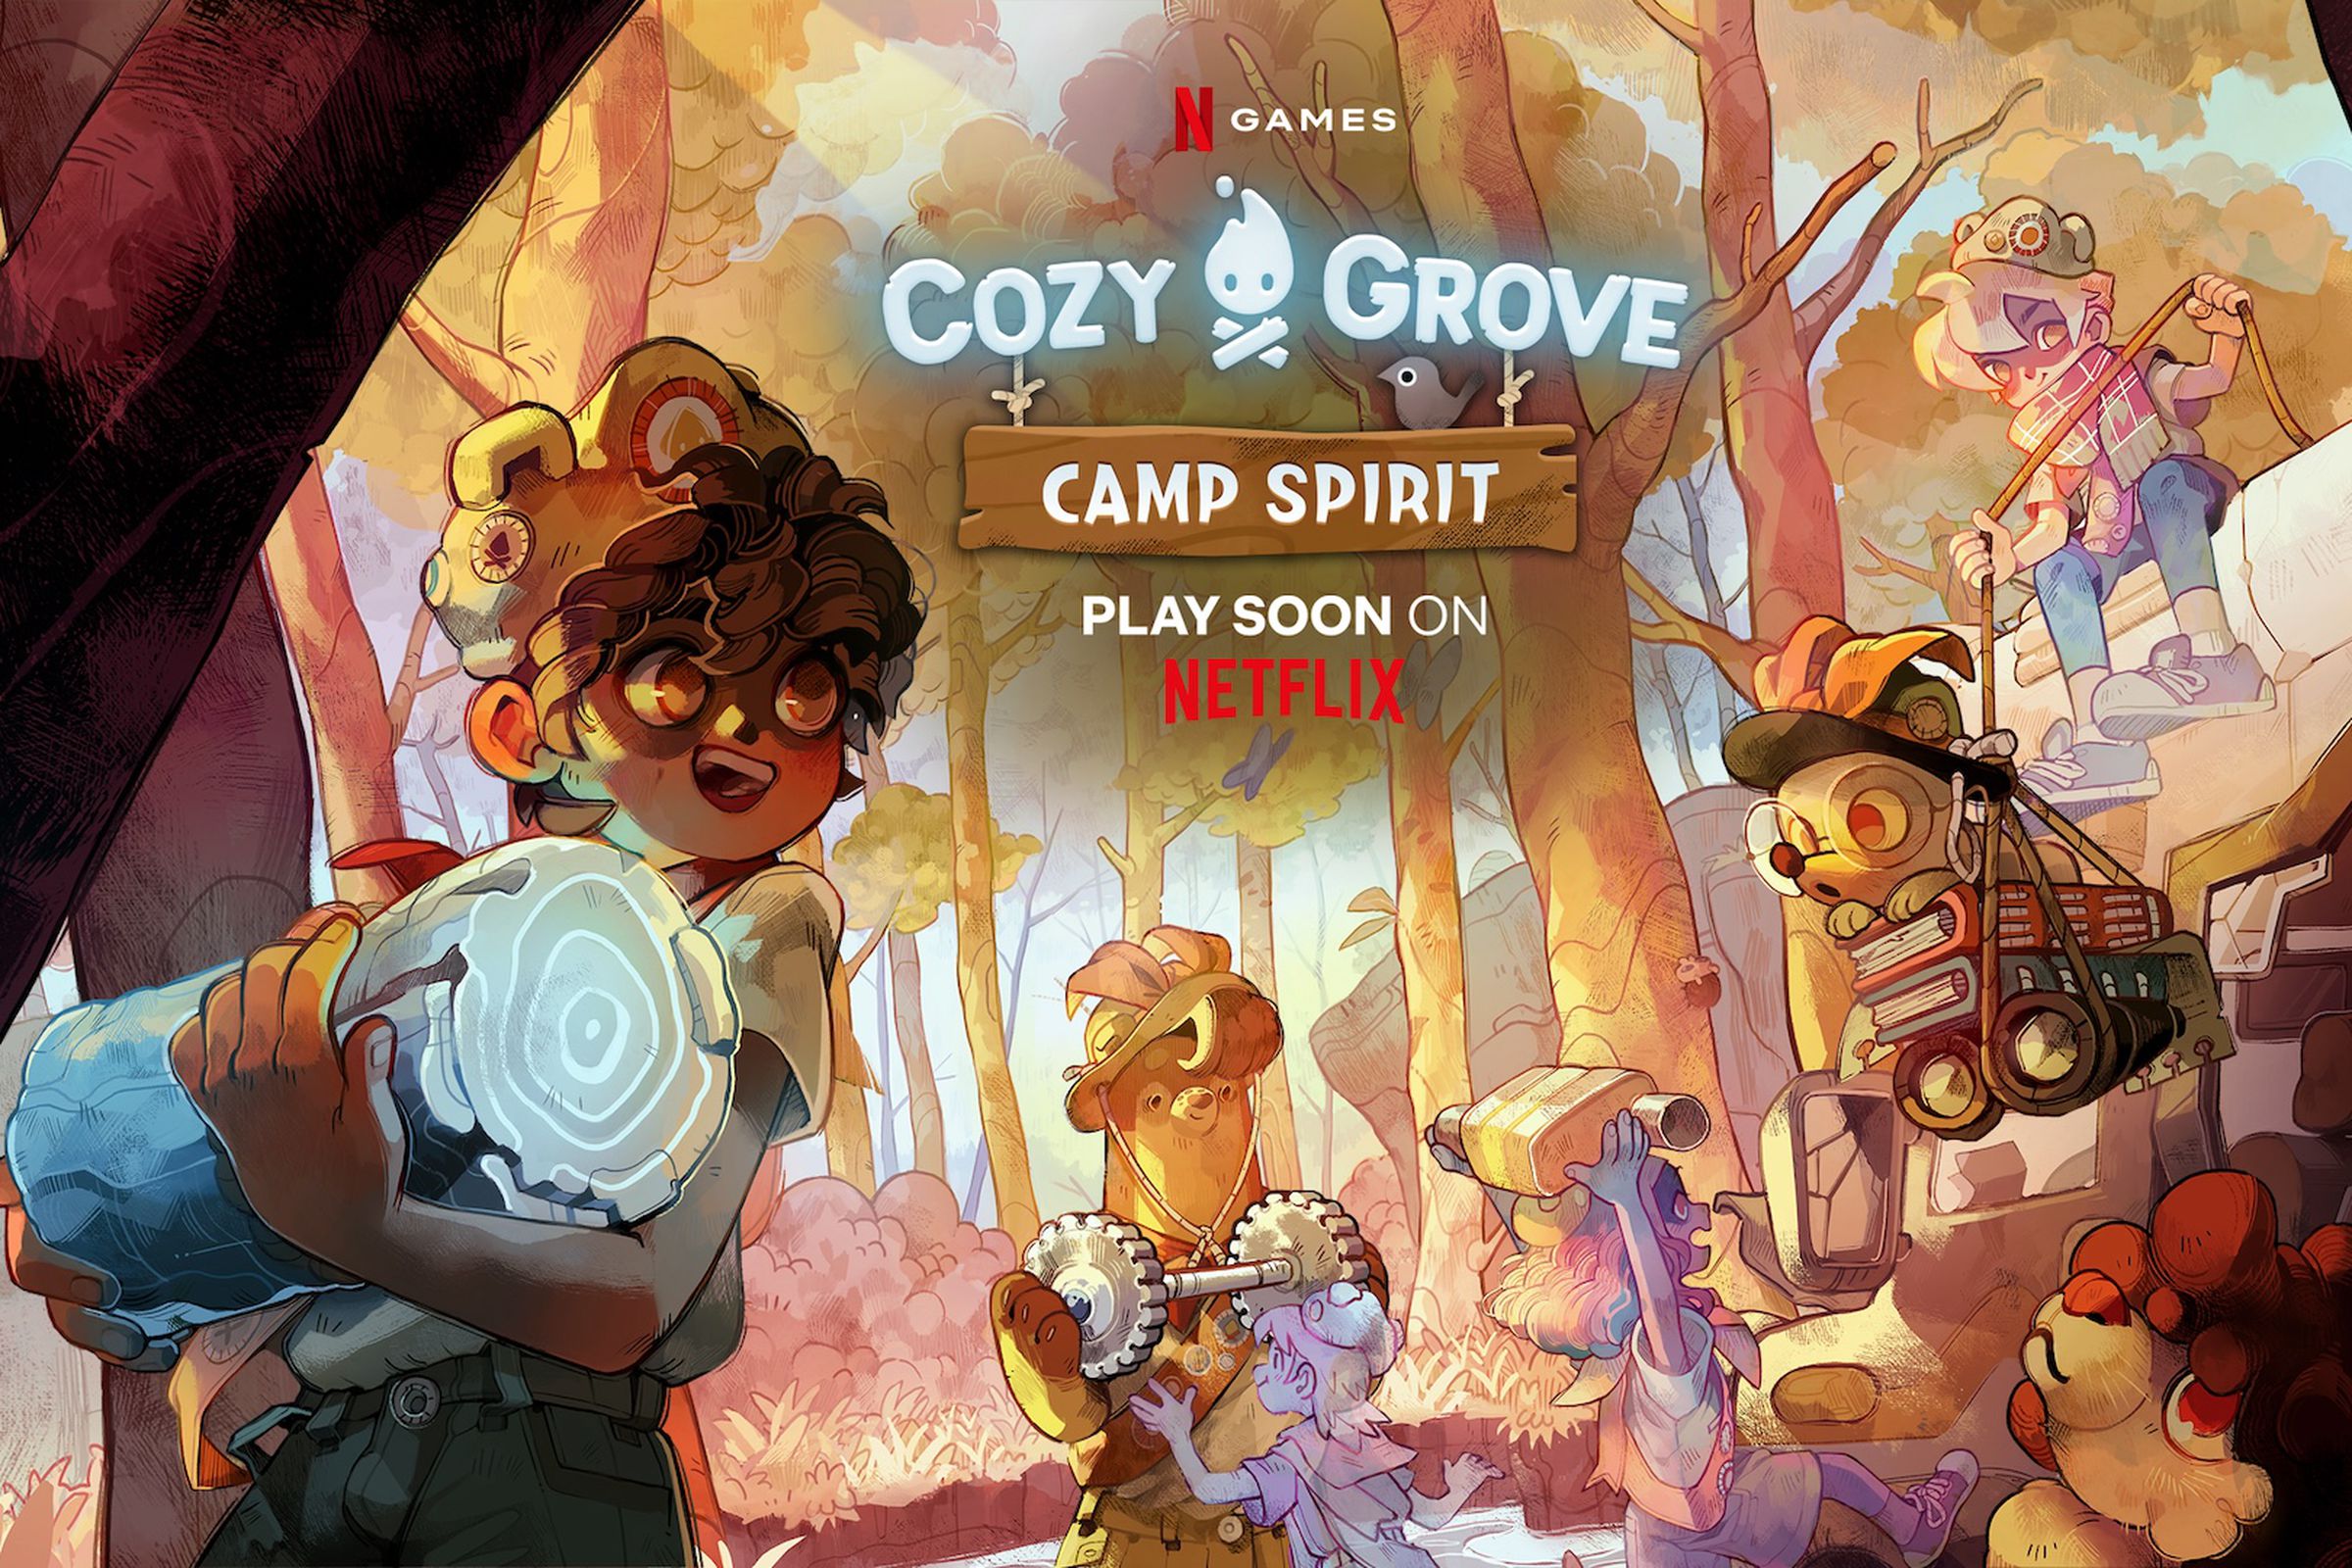 Key art from Cozy Grove: Camp Spirit featuring a human spirit scout carrying a ghostly white log of spirit wood in a forest environment with the Cozy Grove: Camp Spirit and Netflix logos in the center top of the image.